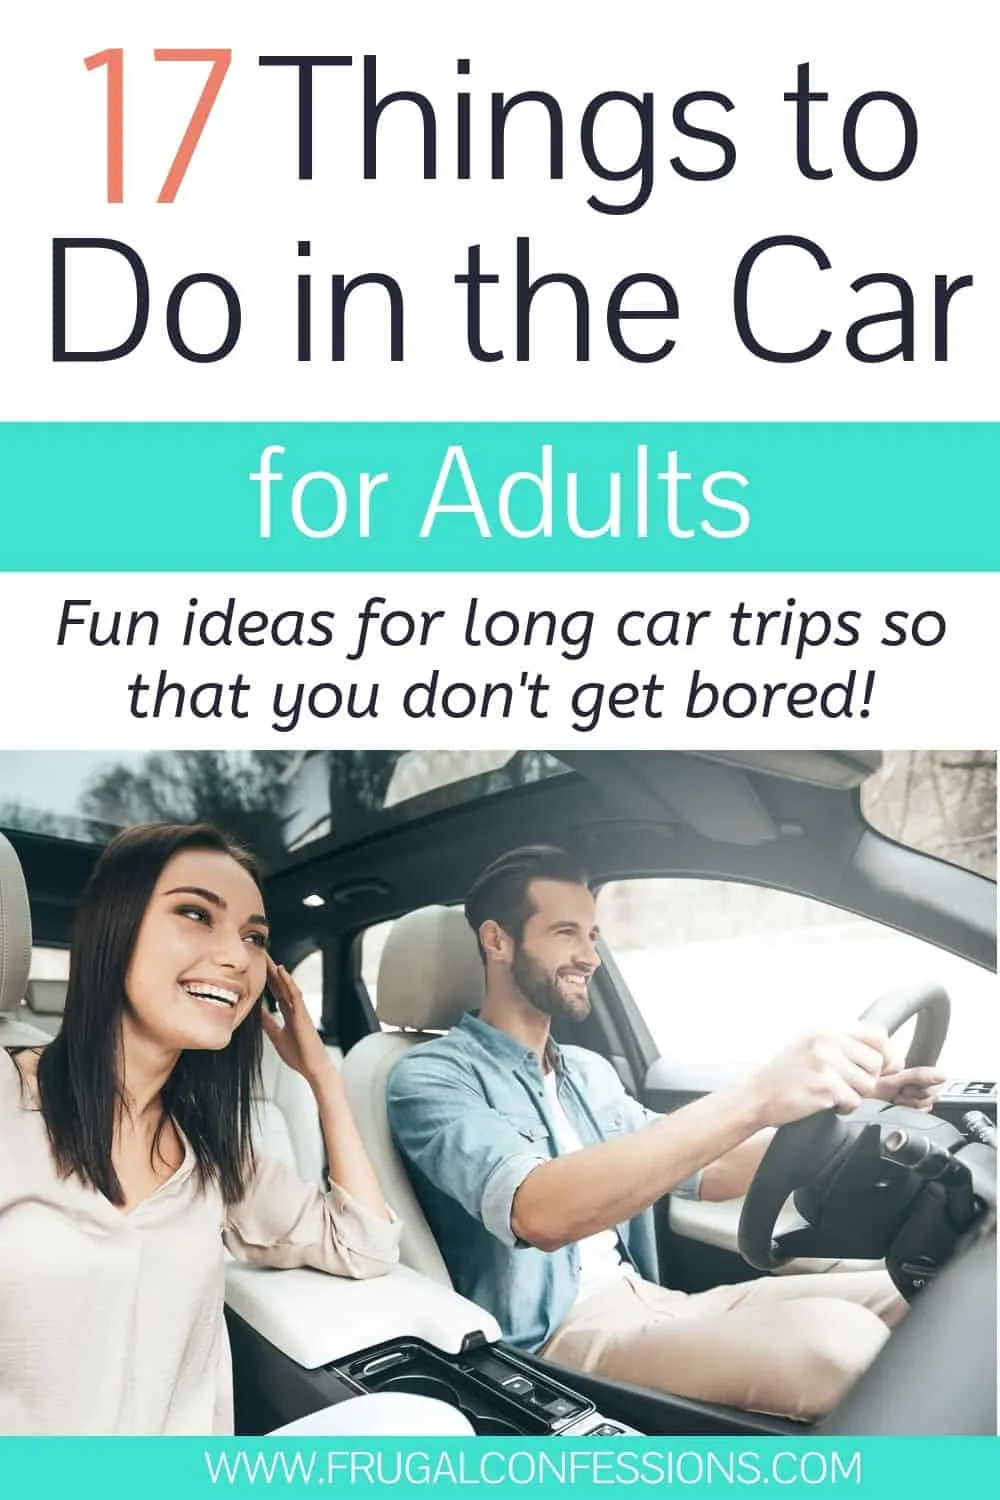 couple taking a long car ride, text overlay "17 Things to do in the car for adults"